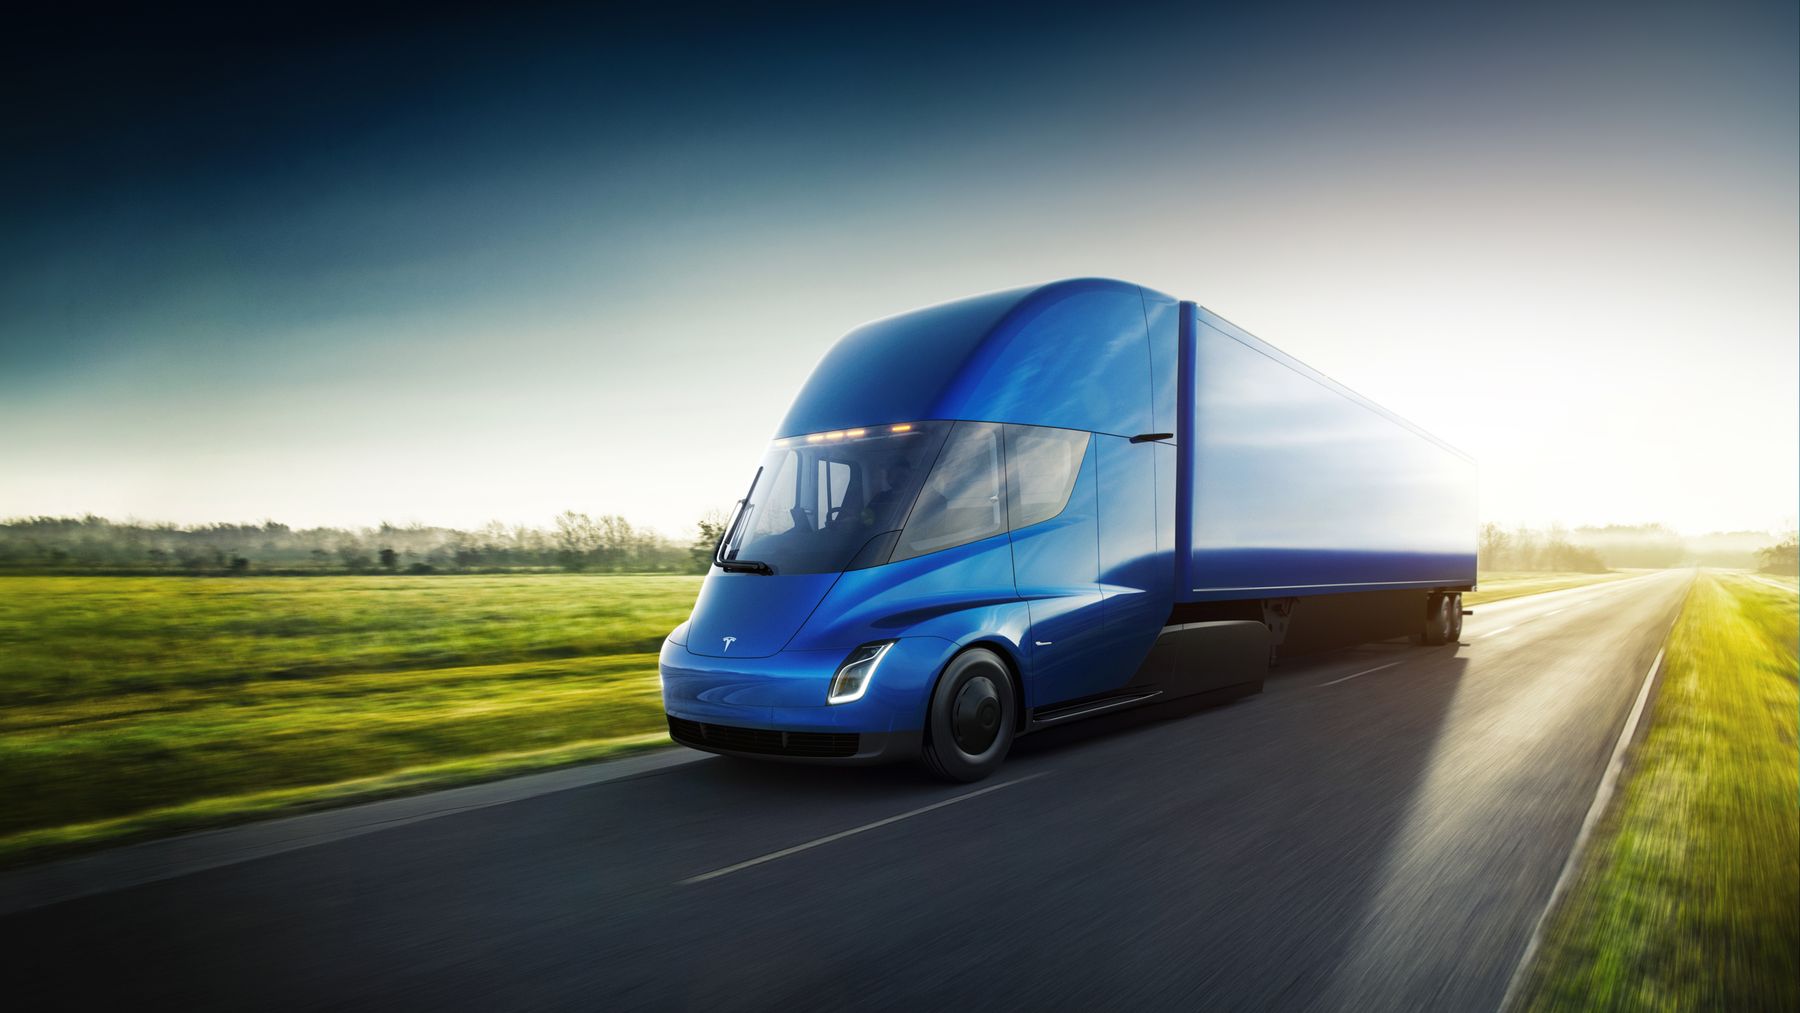 Tesla’s New Semi Truck is Here, and it Has a Tremendous 500-Mile Range